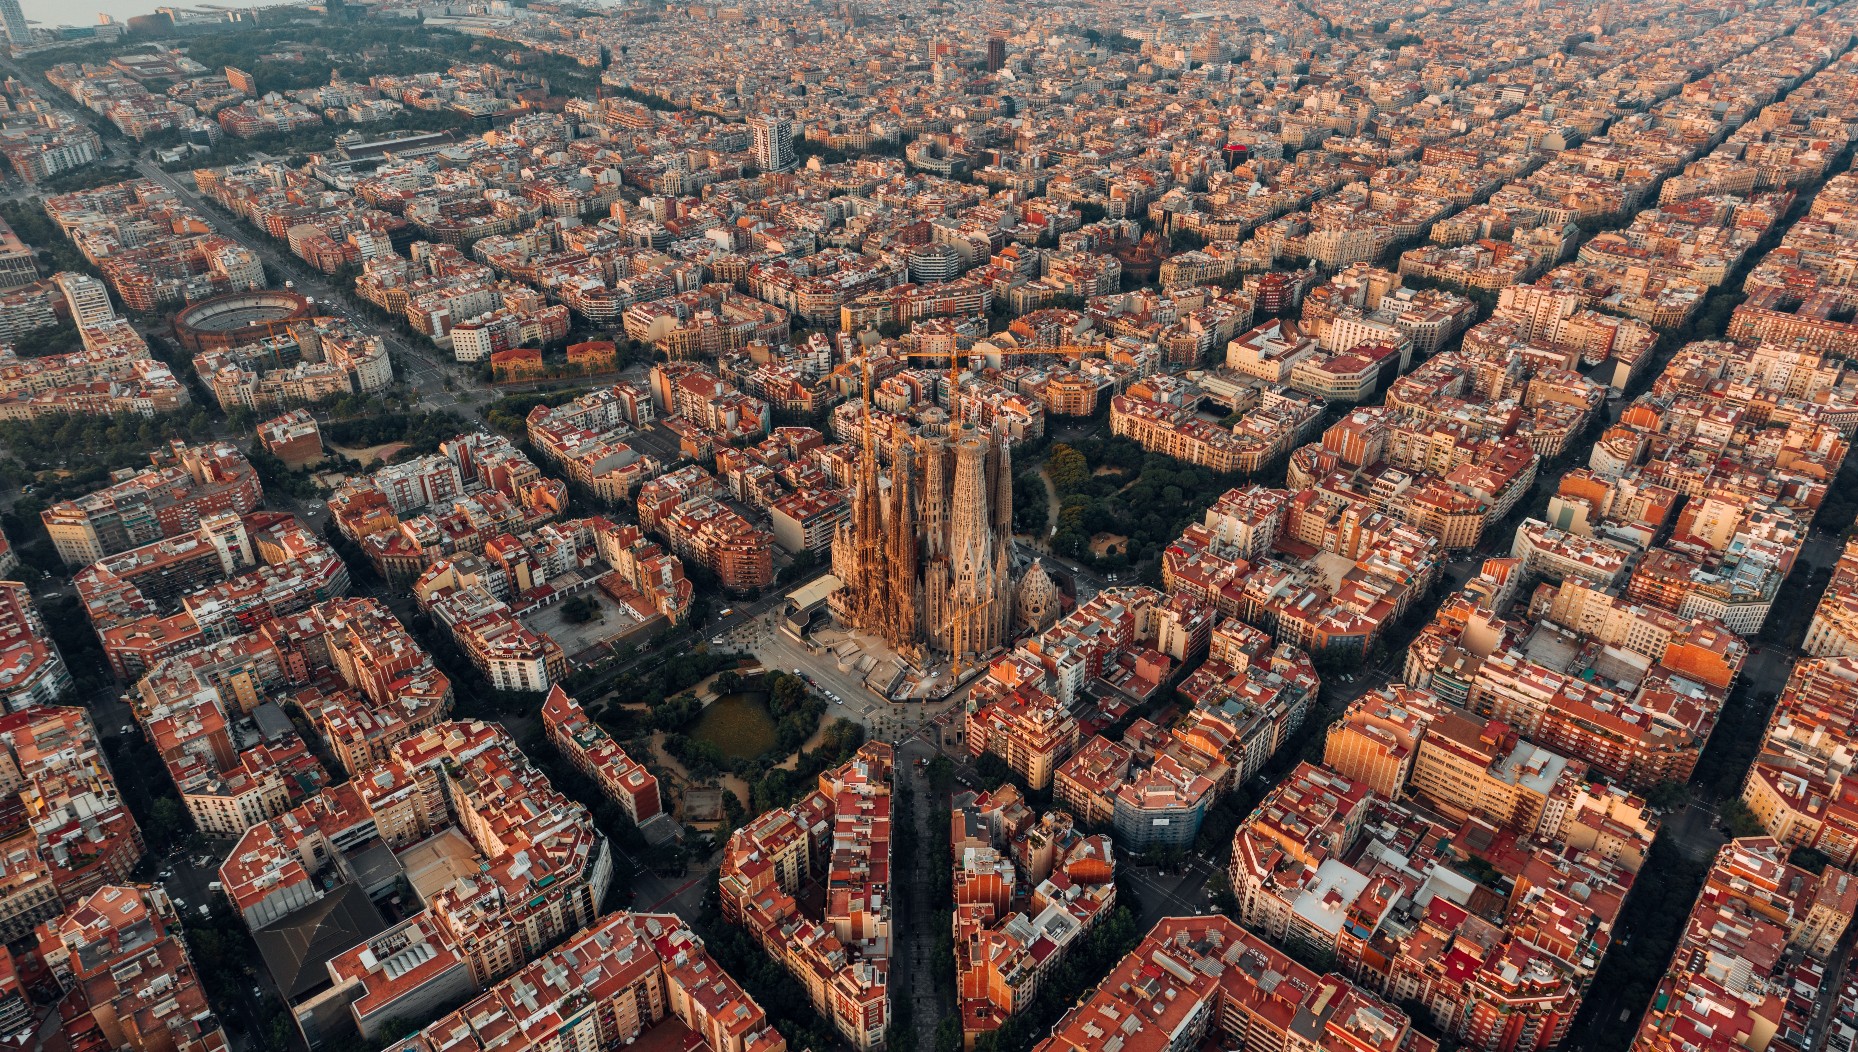 Exploring Barcelona: Our Top Recommendations for Visitors